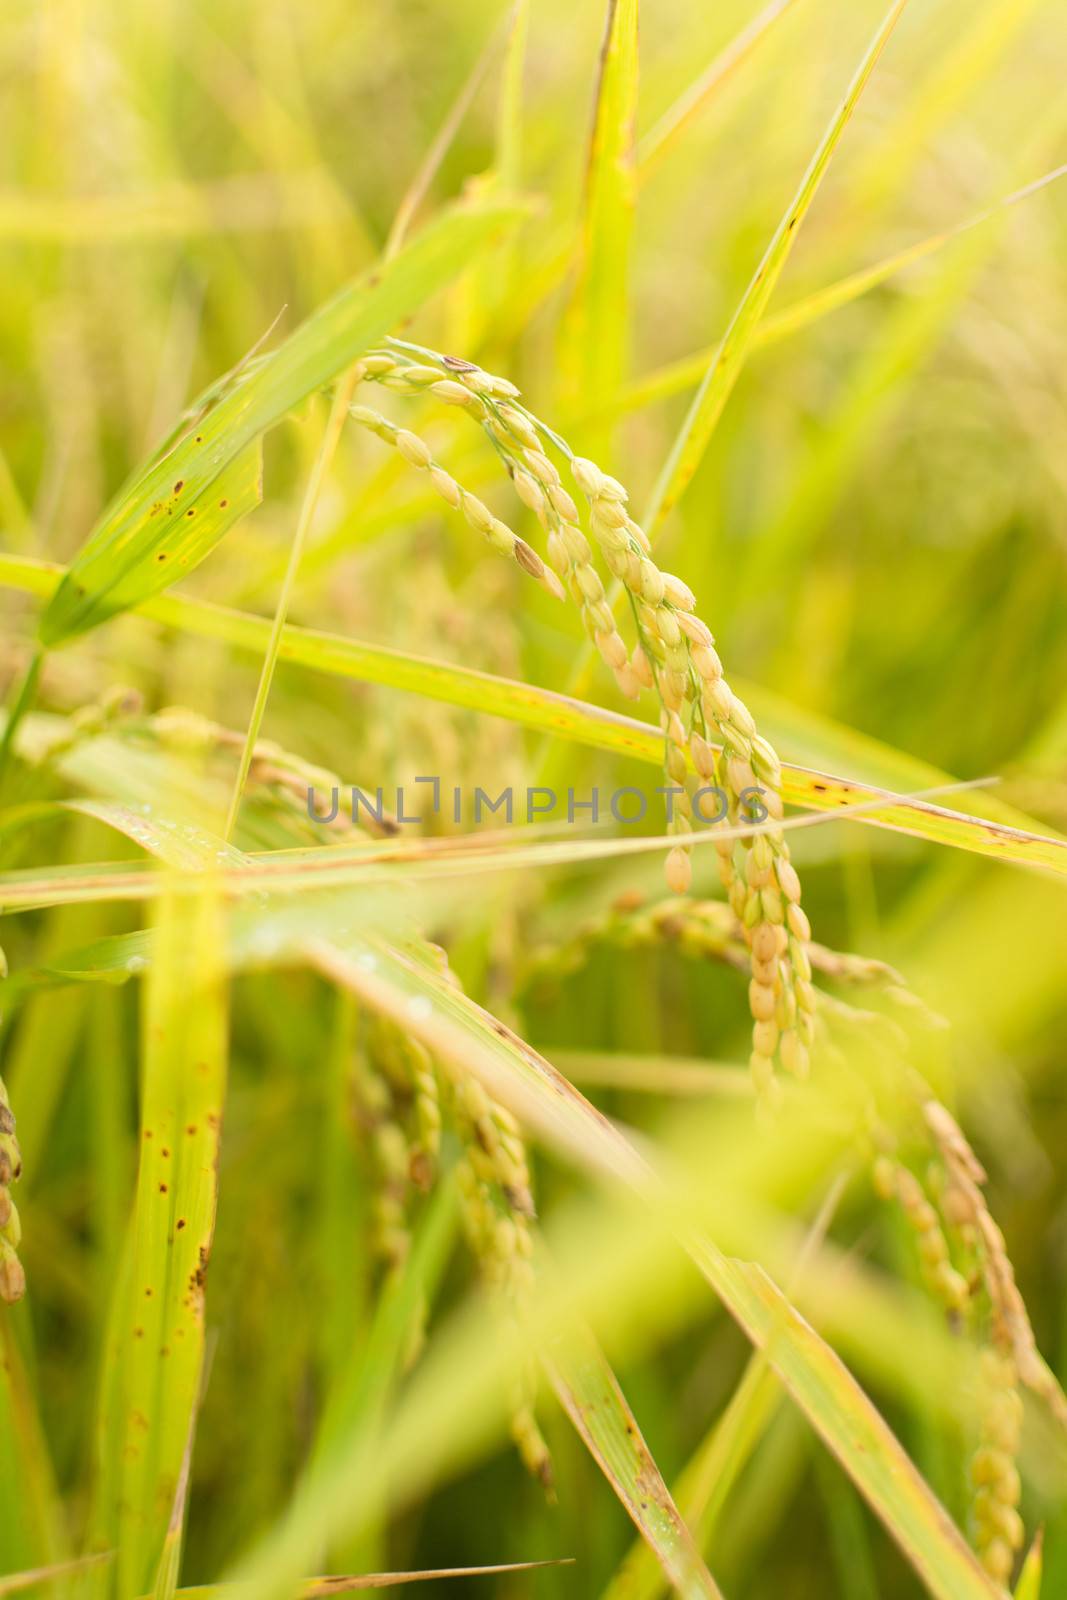 Golden paddy rice farm, closeup image with shallow depth of field.